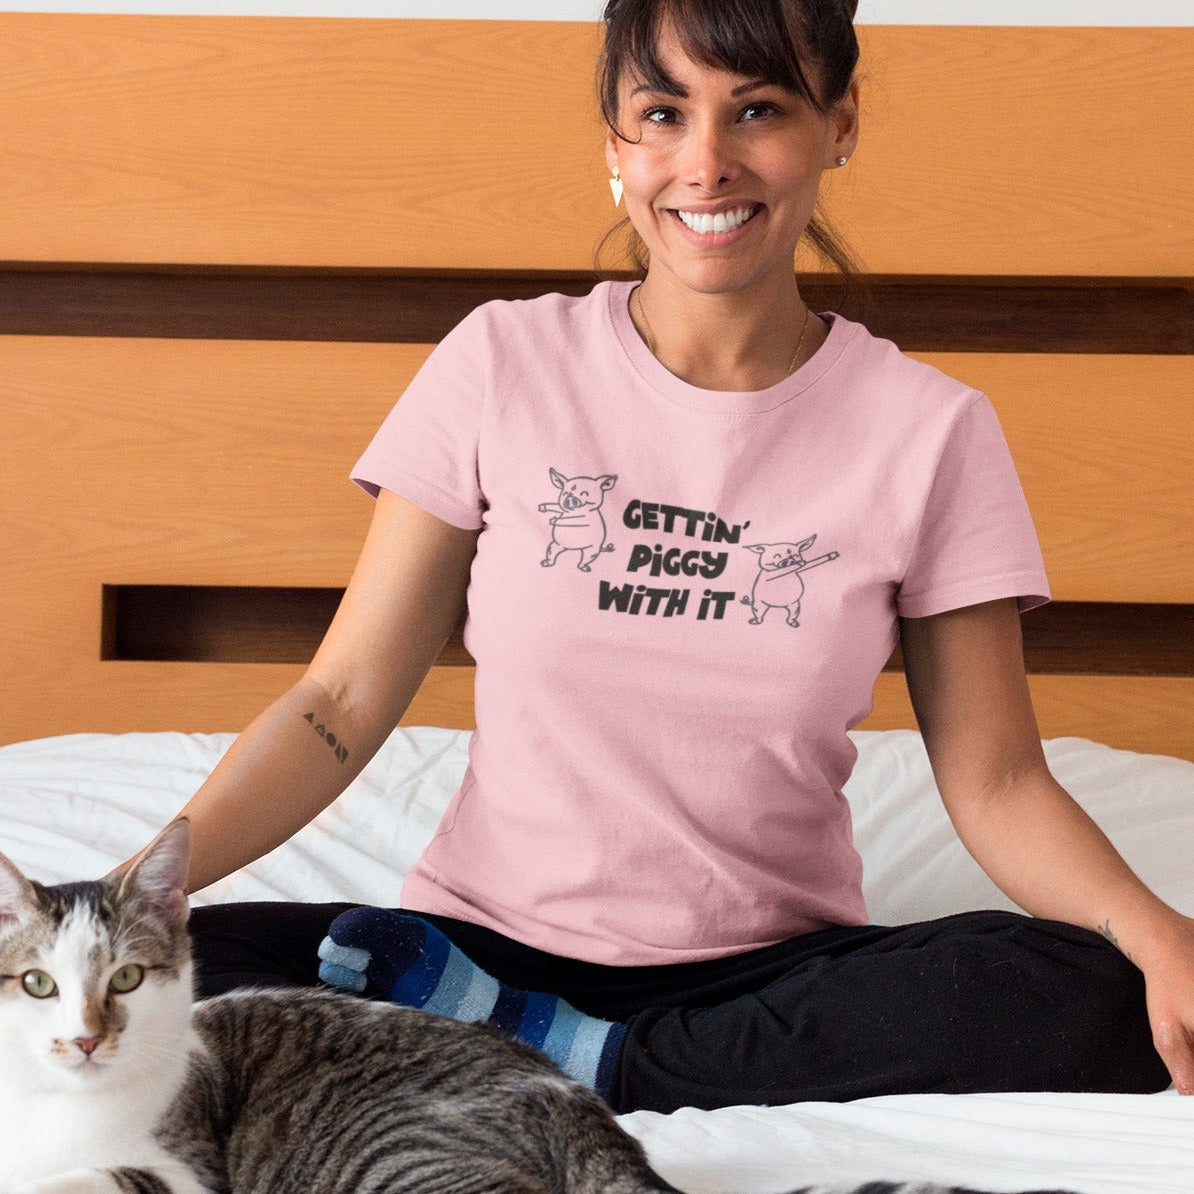 gettin-piggy-with-it-pink-t-shirt-funny-dancing-pigs-portrait-of-a-happy-cat-owner-wearing-a-t-shirt-mockup-on-bed